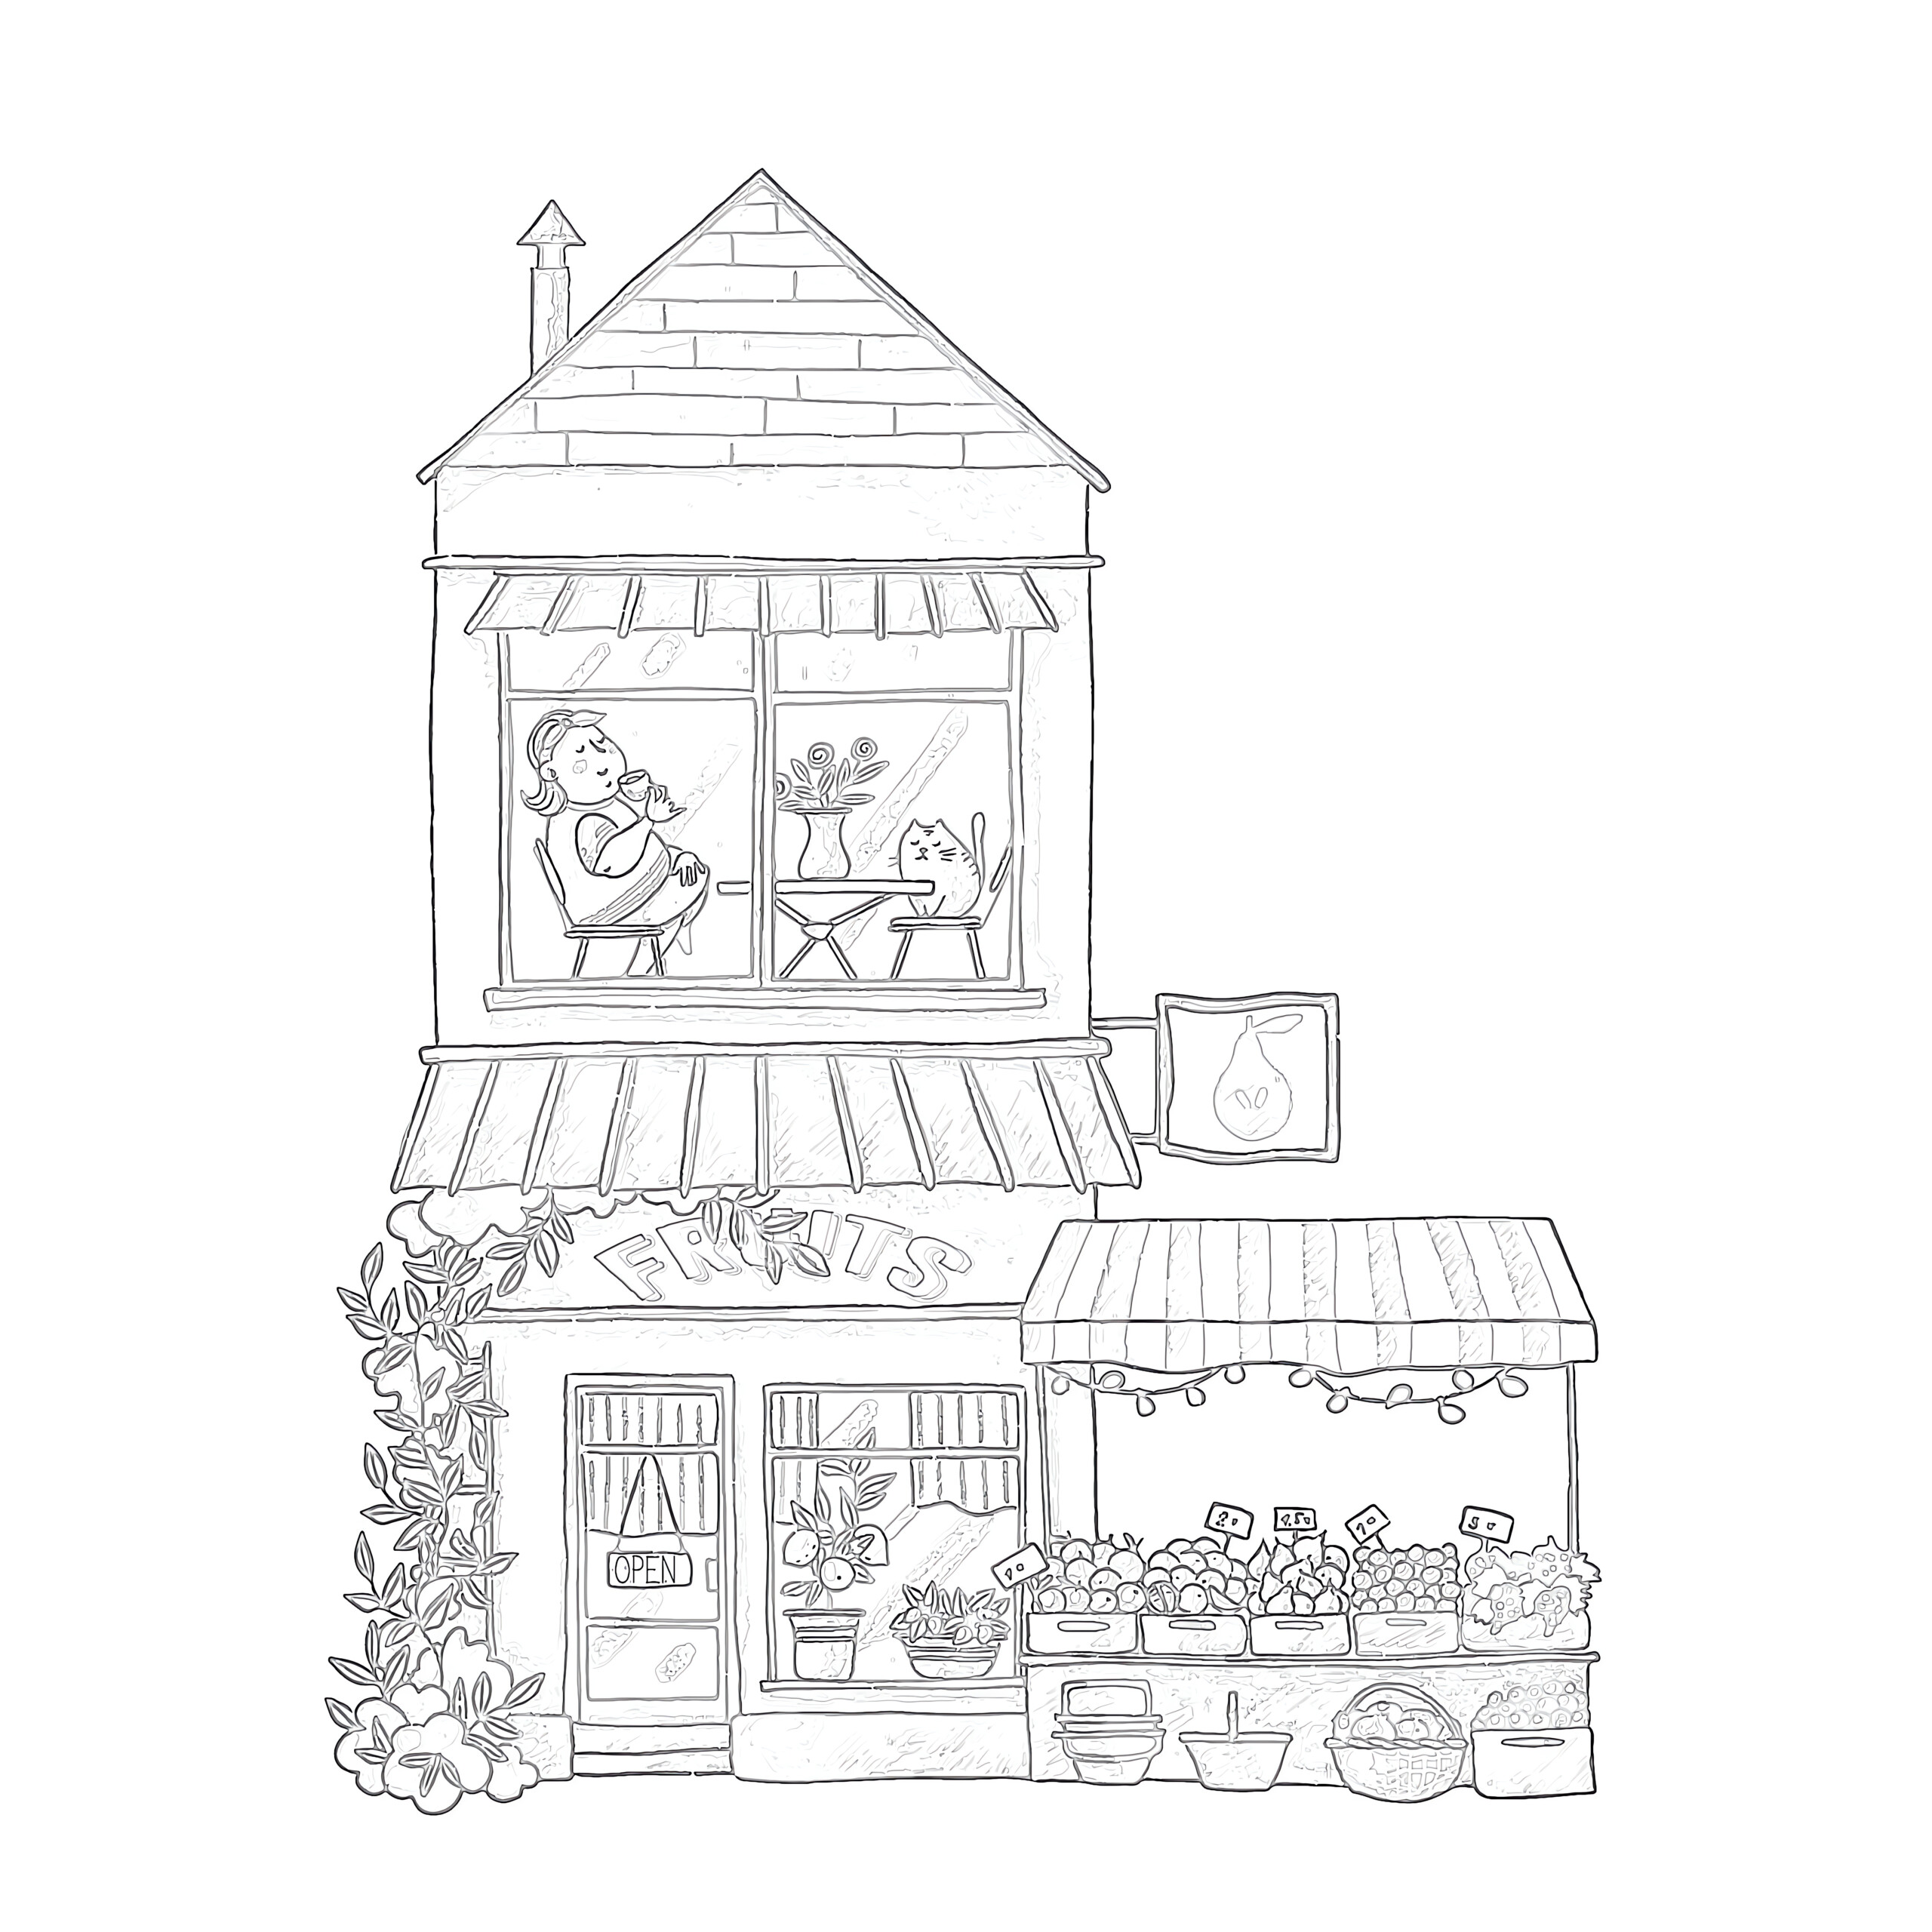 Fruits Market Building - Coloring page